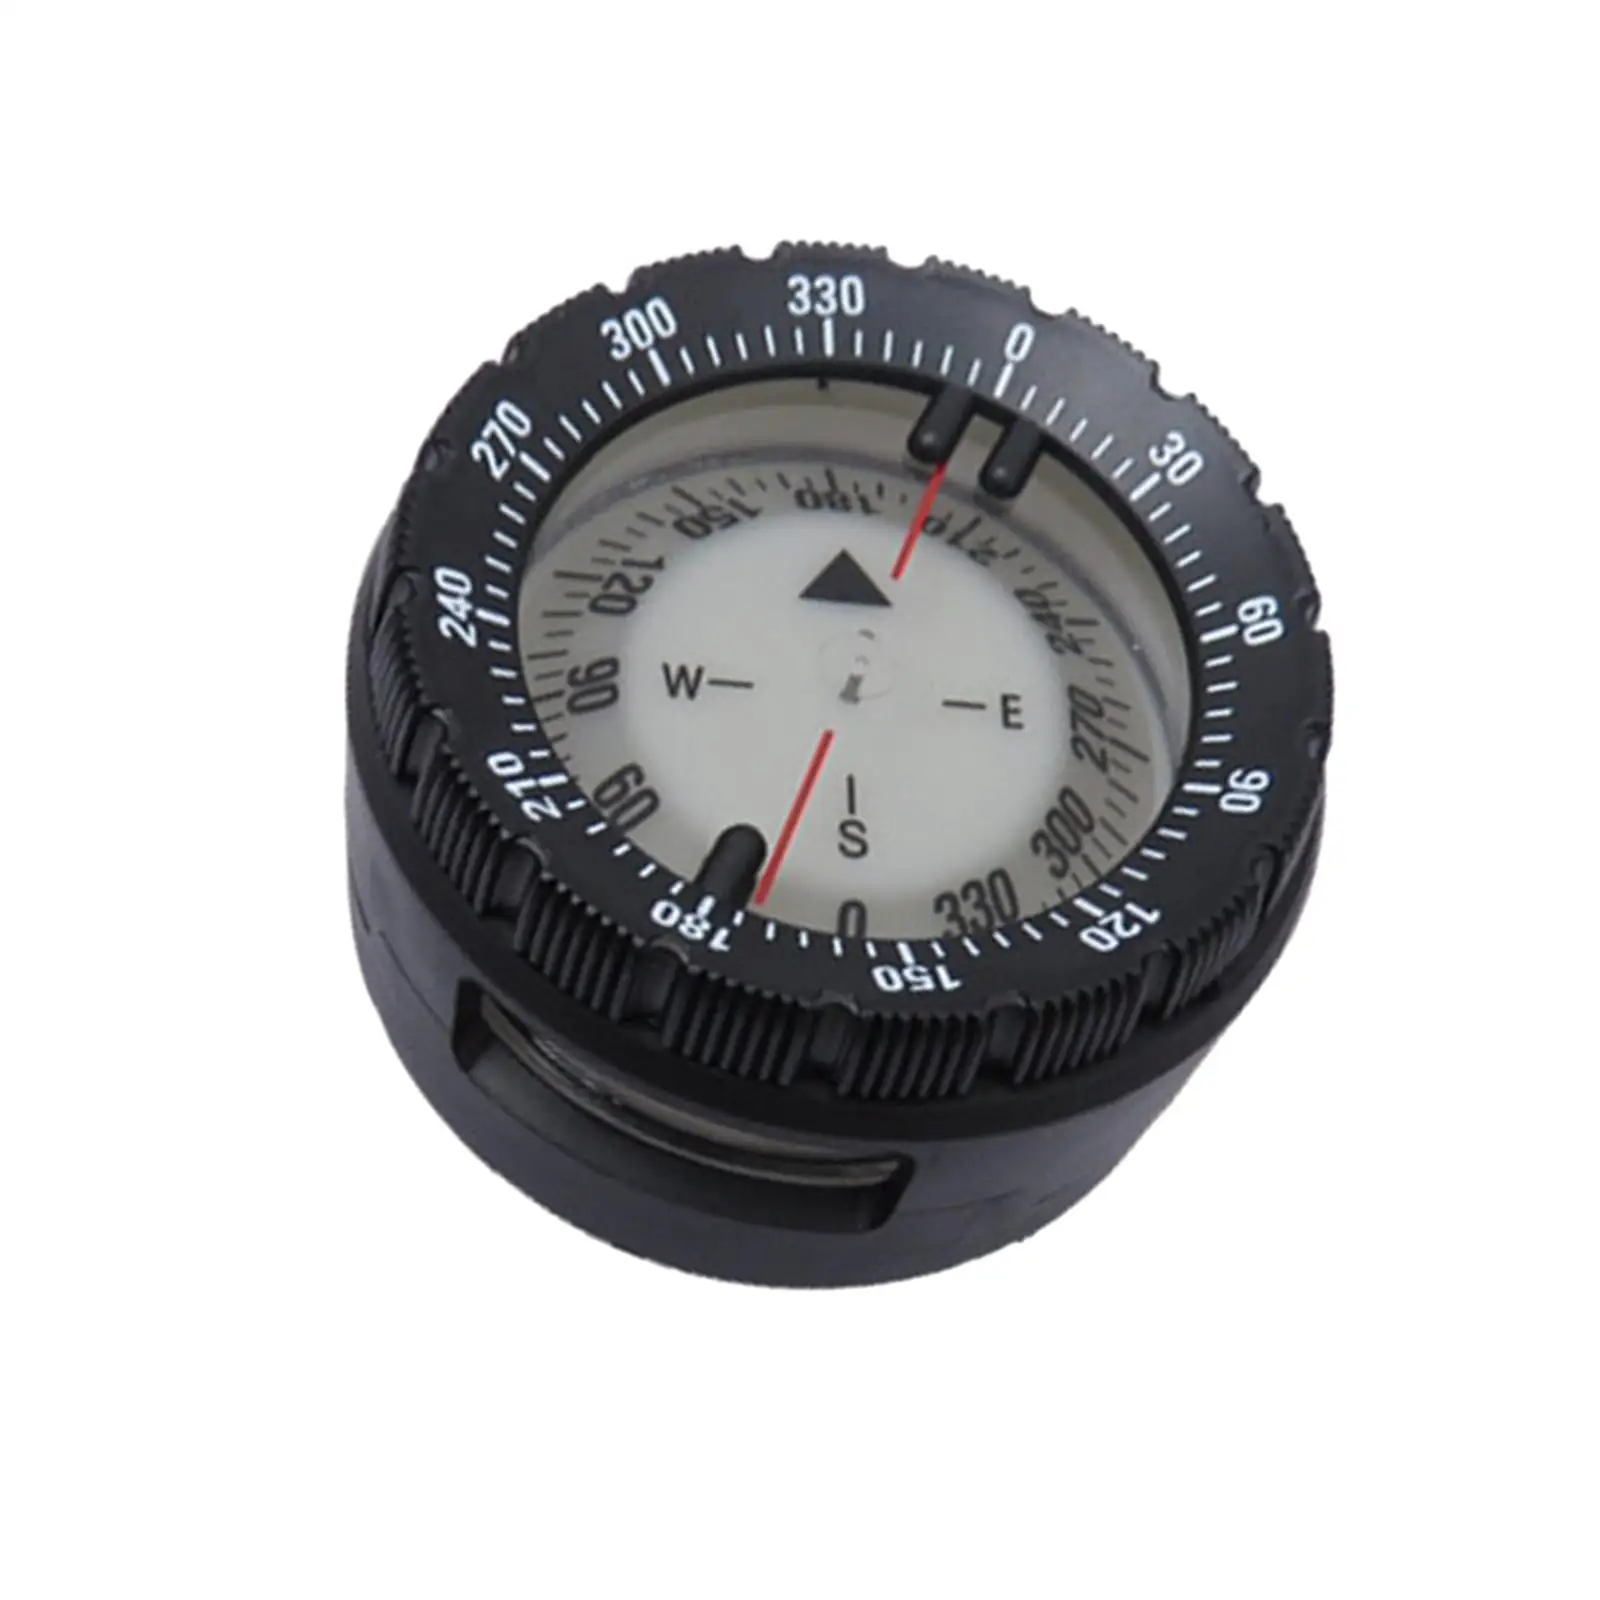 Camping Survival Compass Waterproof for Backpacking Orienteering Navigation